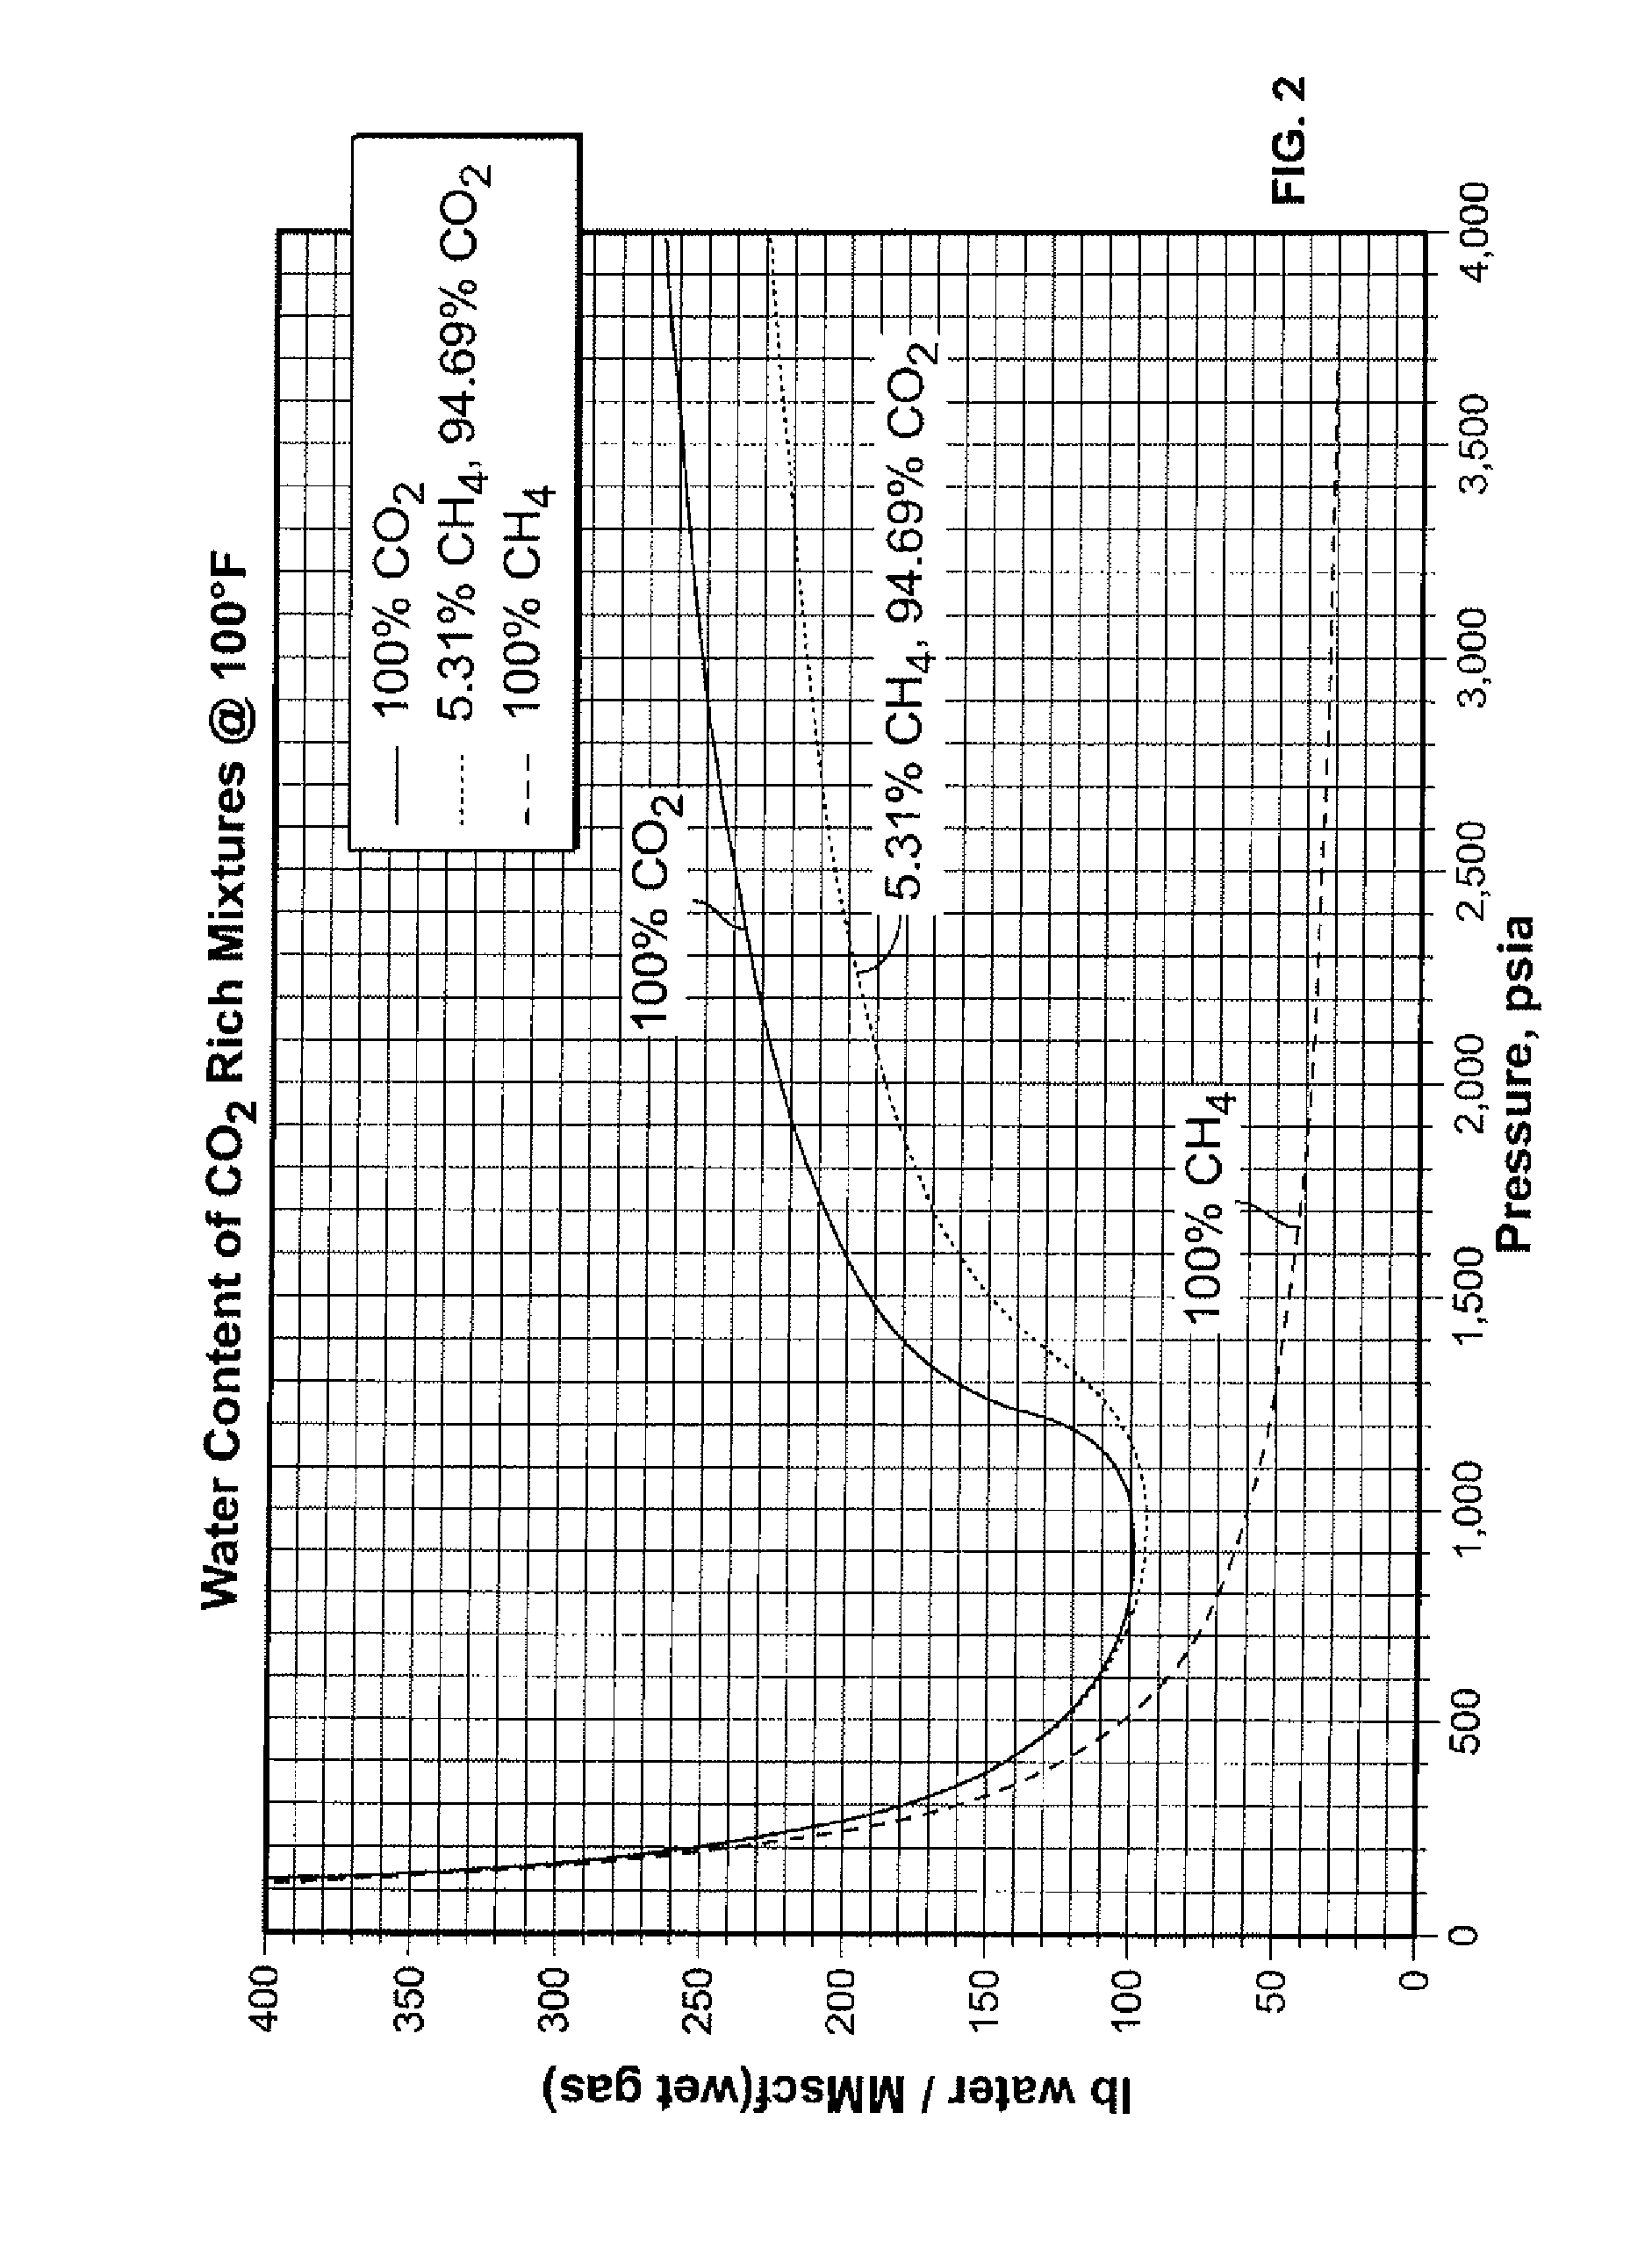 Process for optimizing removal of condensable components from a fluid